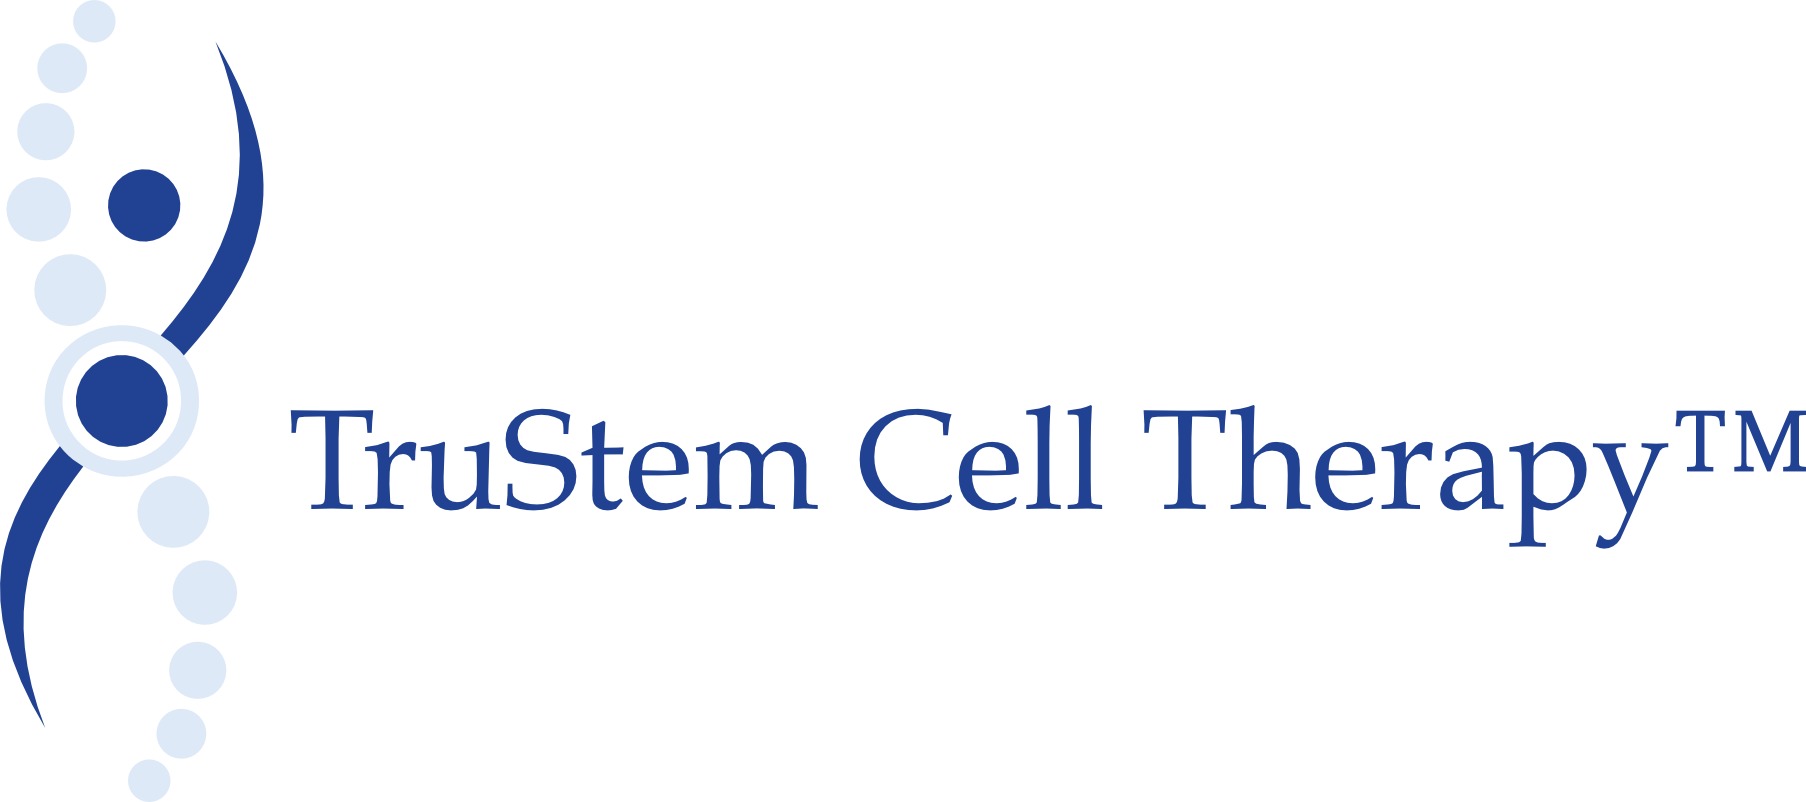 stem cell treatment for brain injury